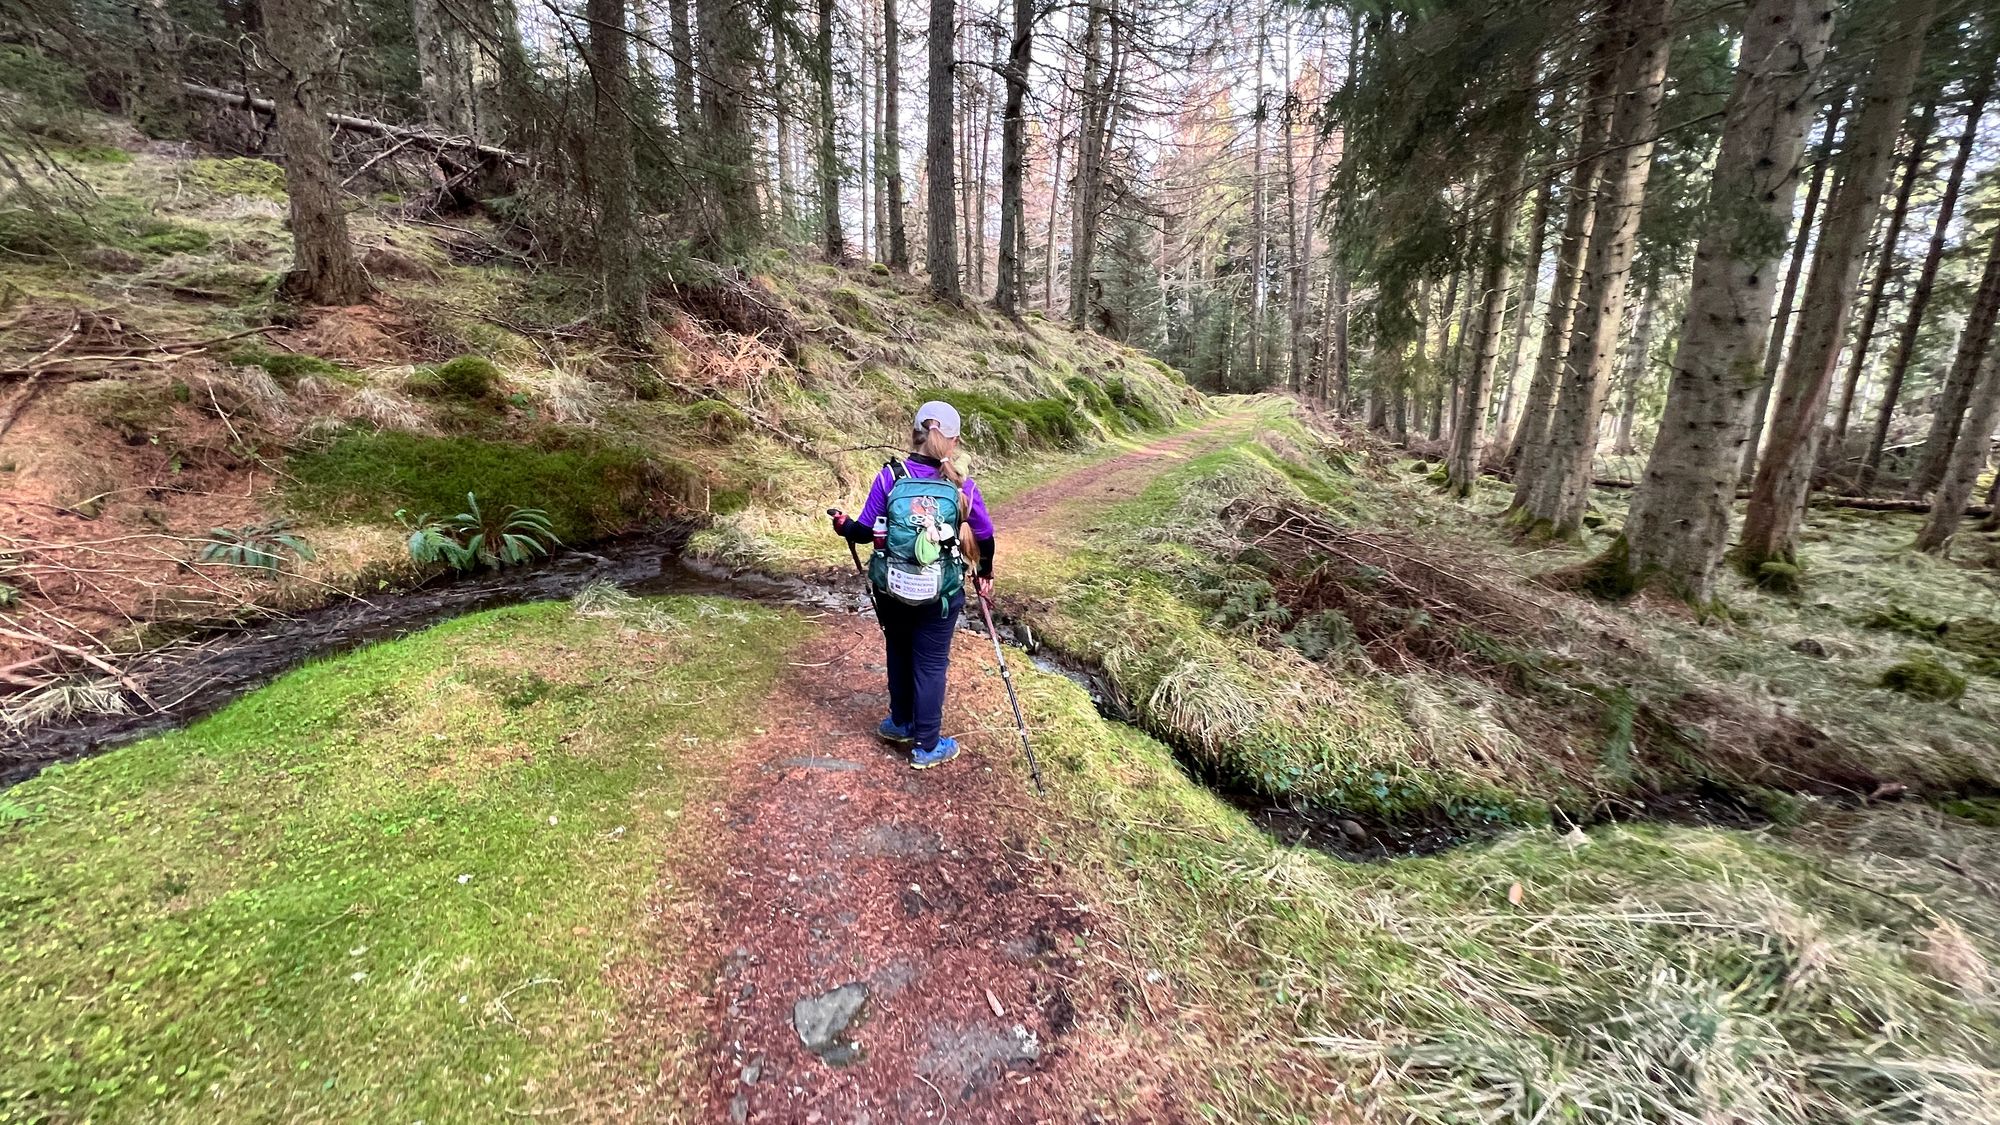 The paths through the Tay Forest were all easy to follow and soft underfoot. It was a pleasure